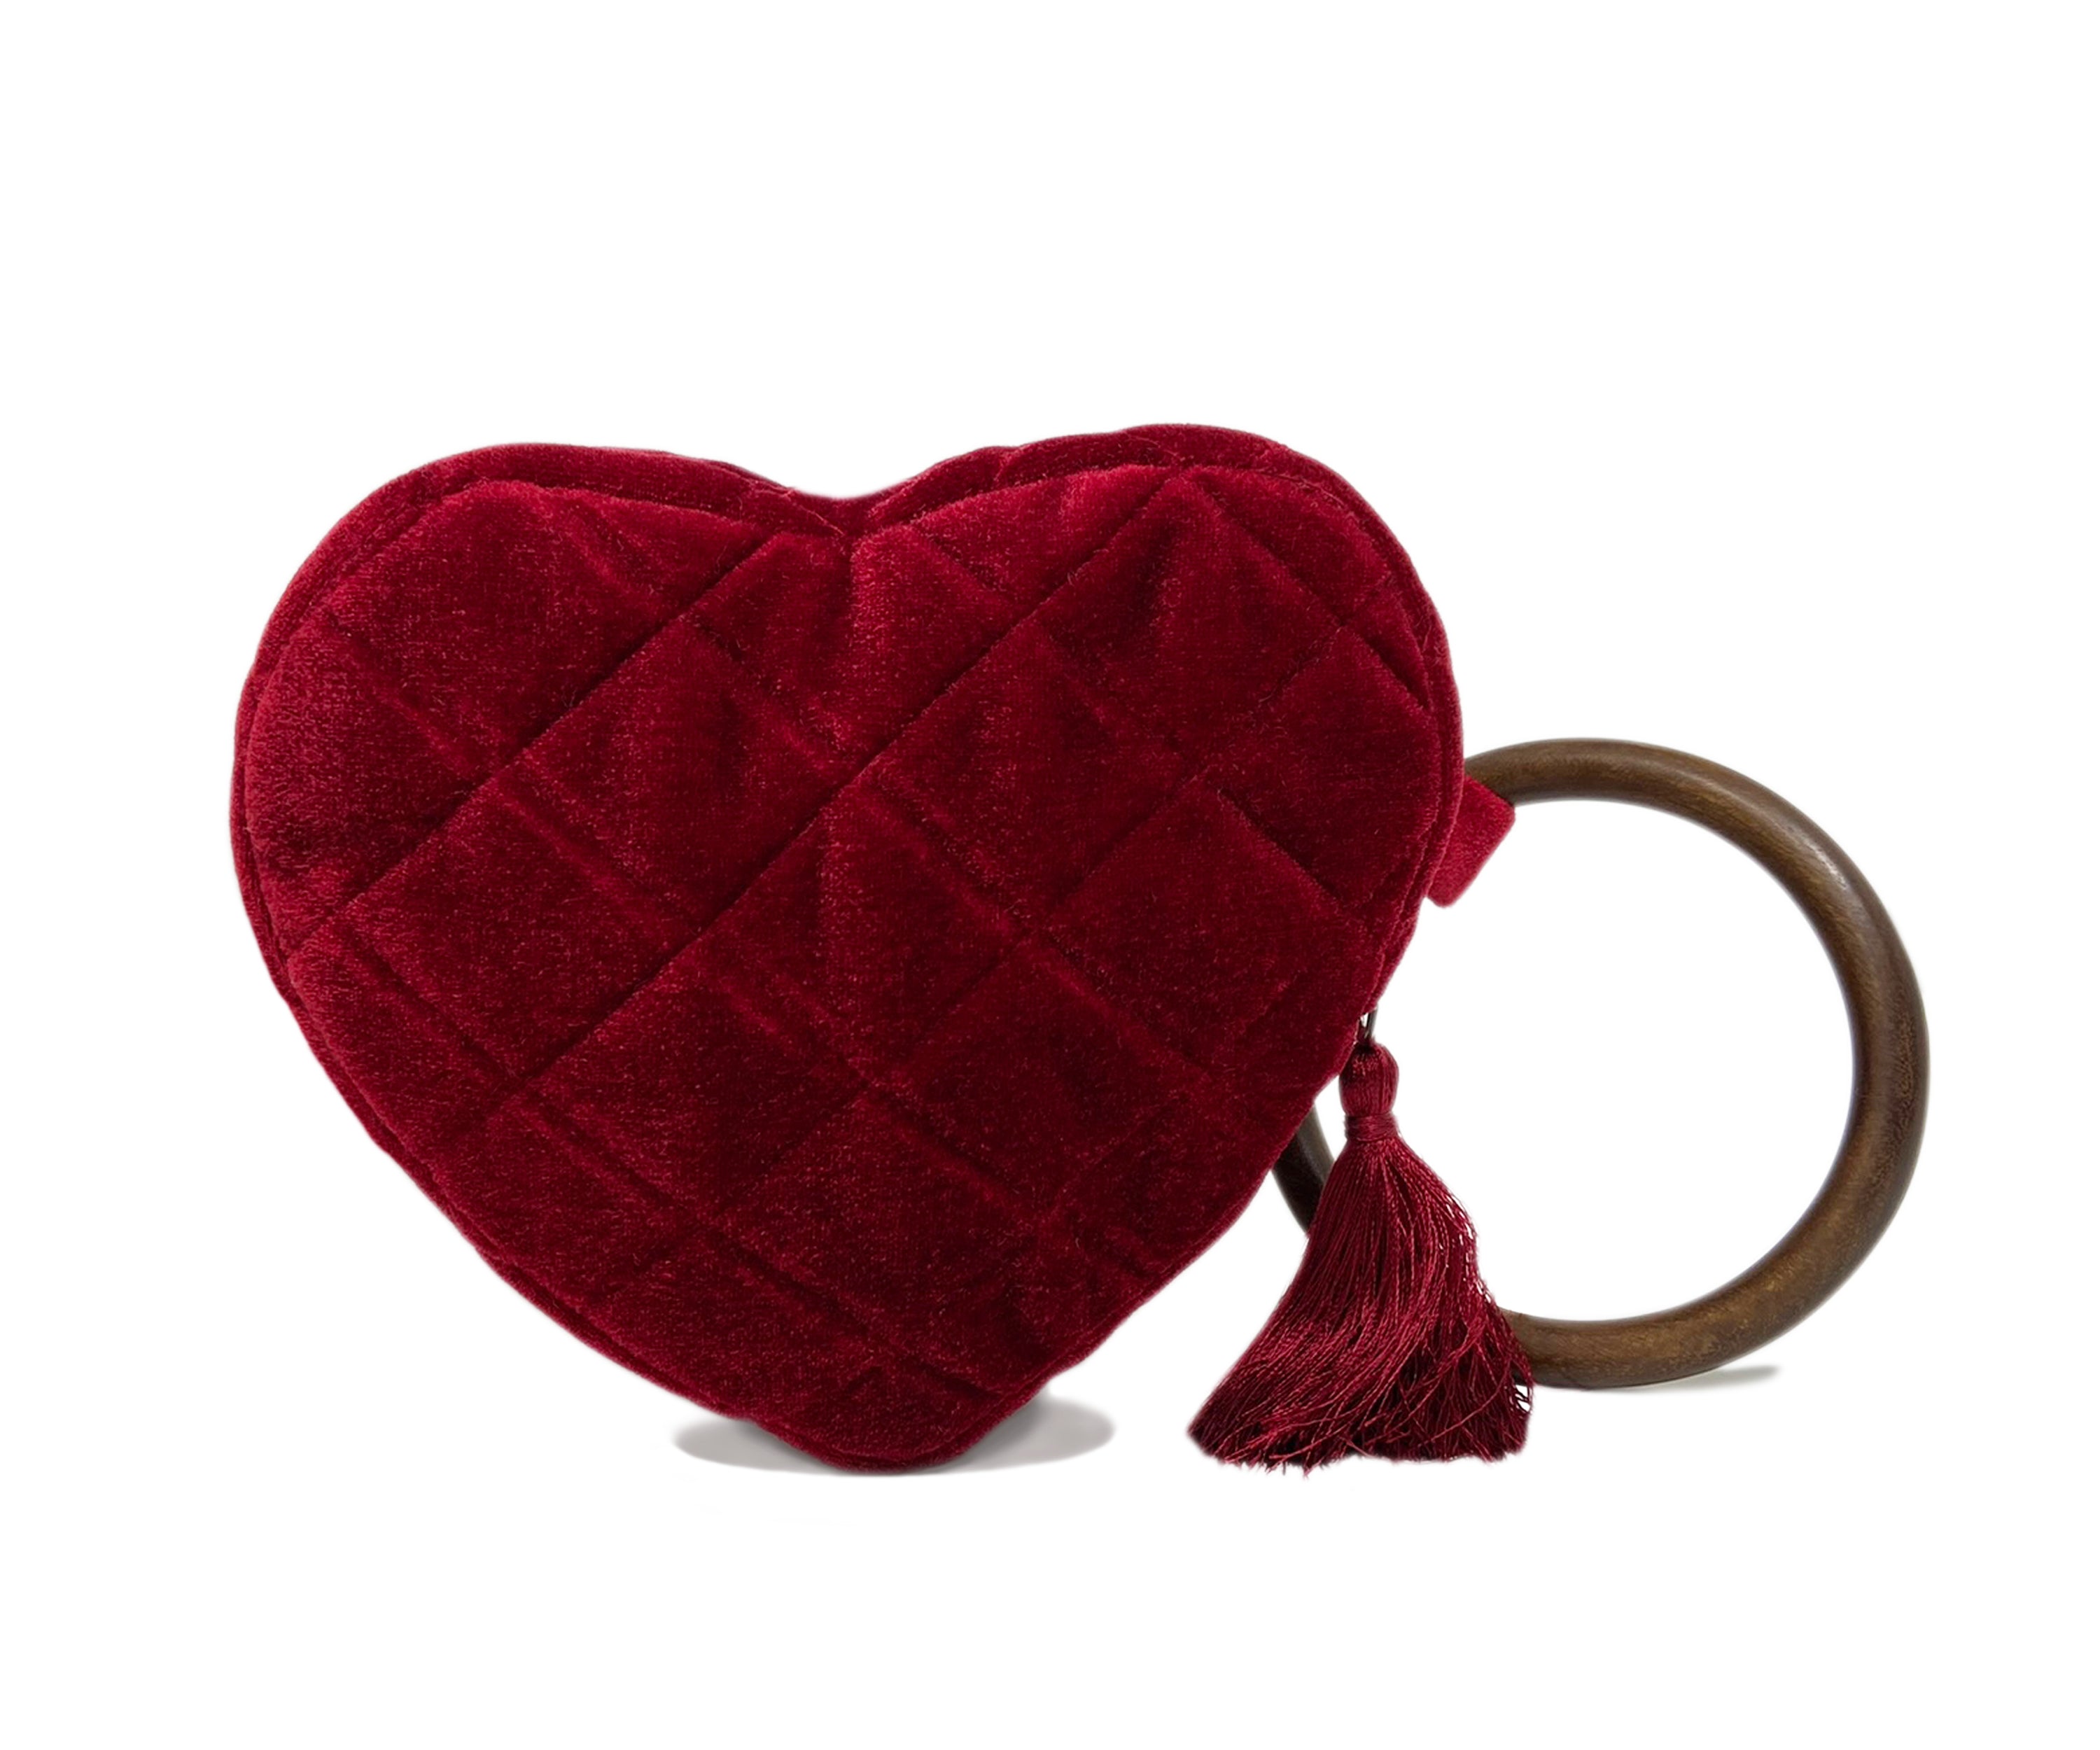 Amore Beaute Customize the red velvet purse to a color of your choice to make the perfect gift